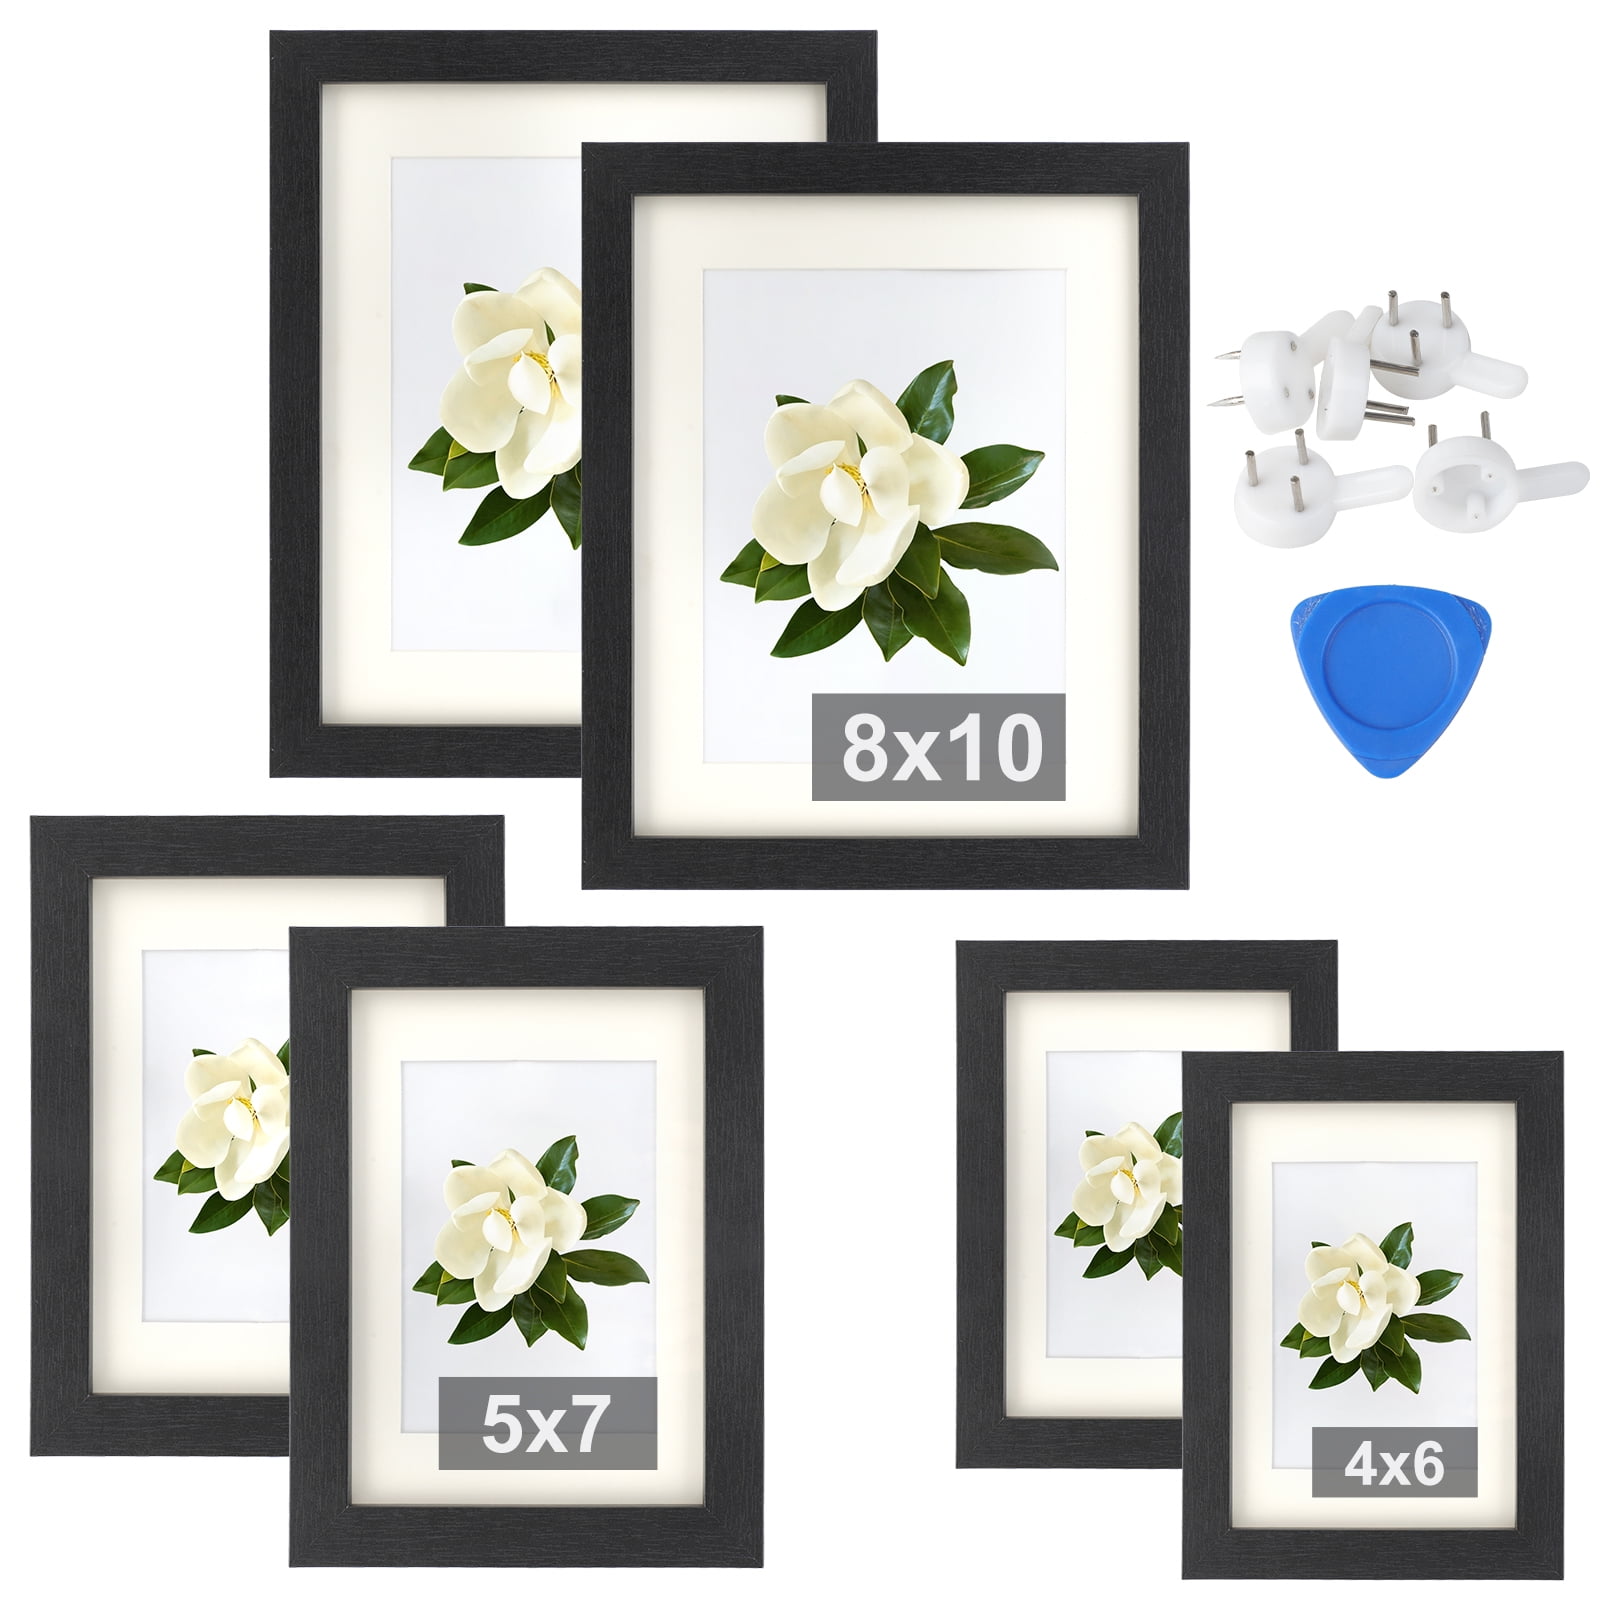 Metal/Wood Look Photo Frames Silver Gold Wall Mountable Hanging Free Standing 